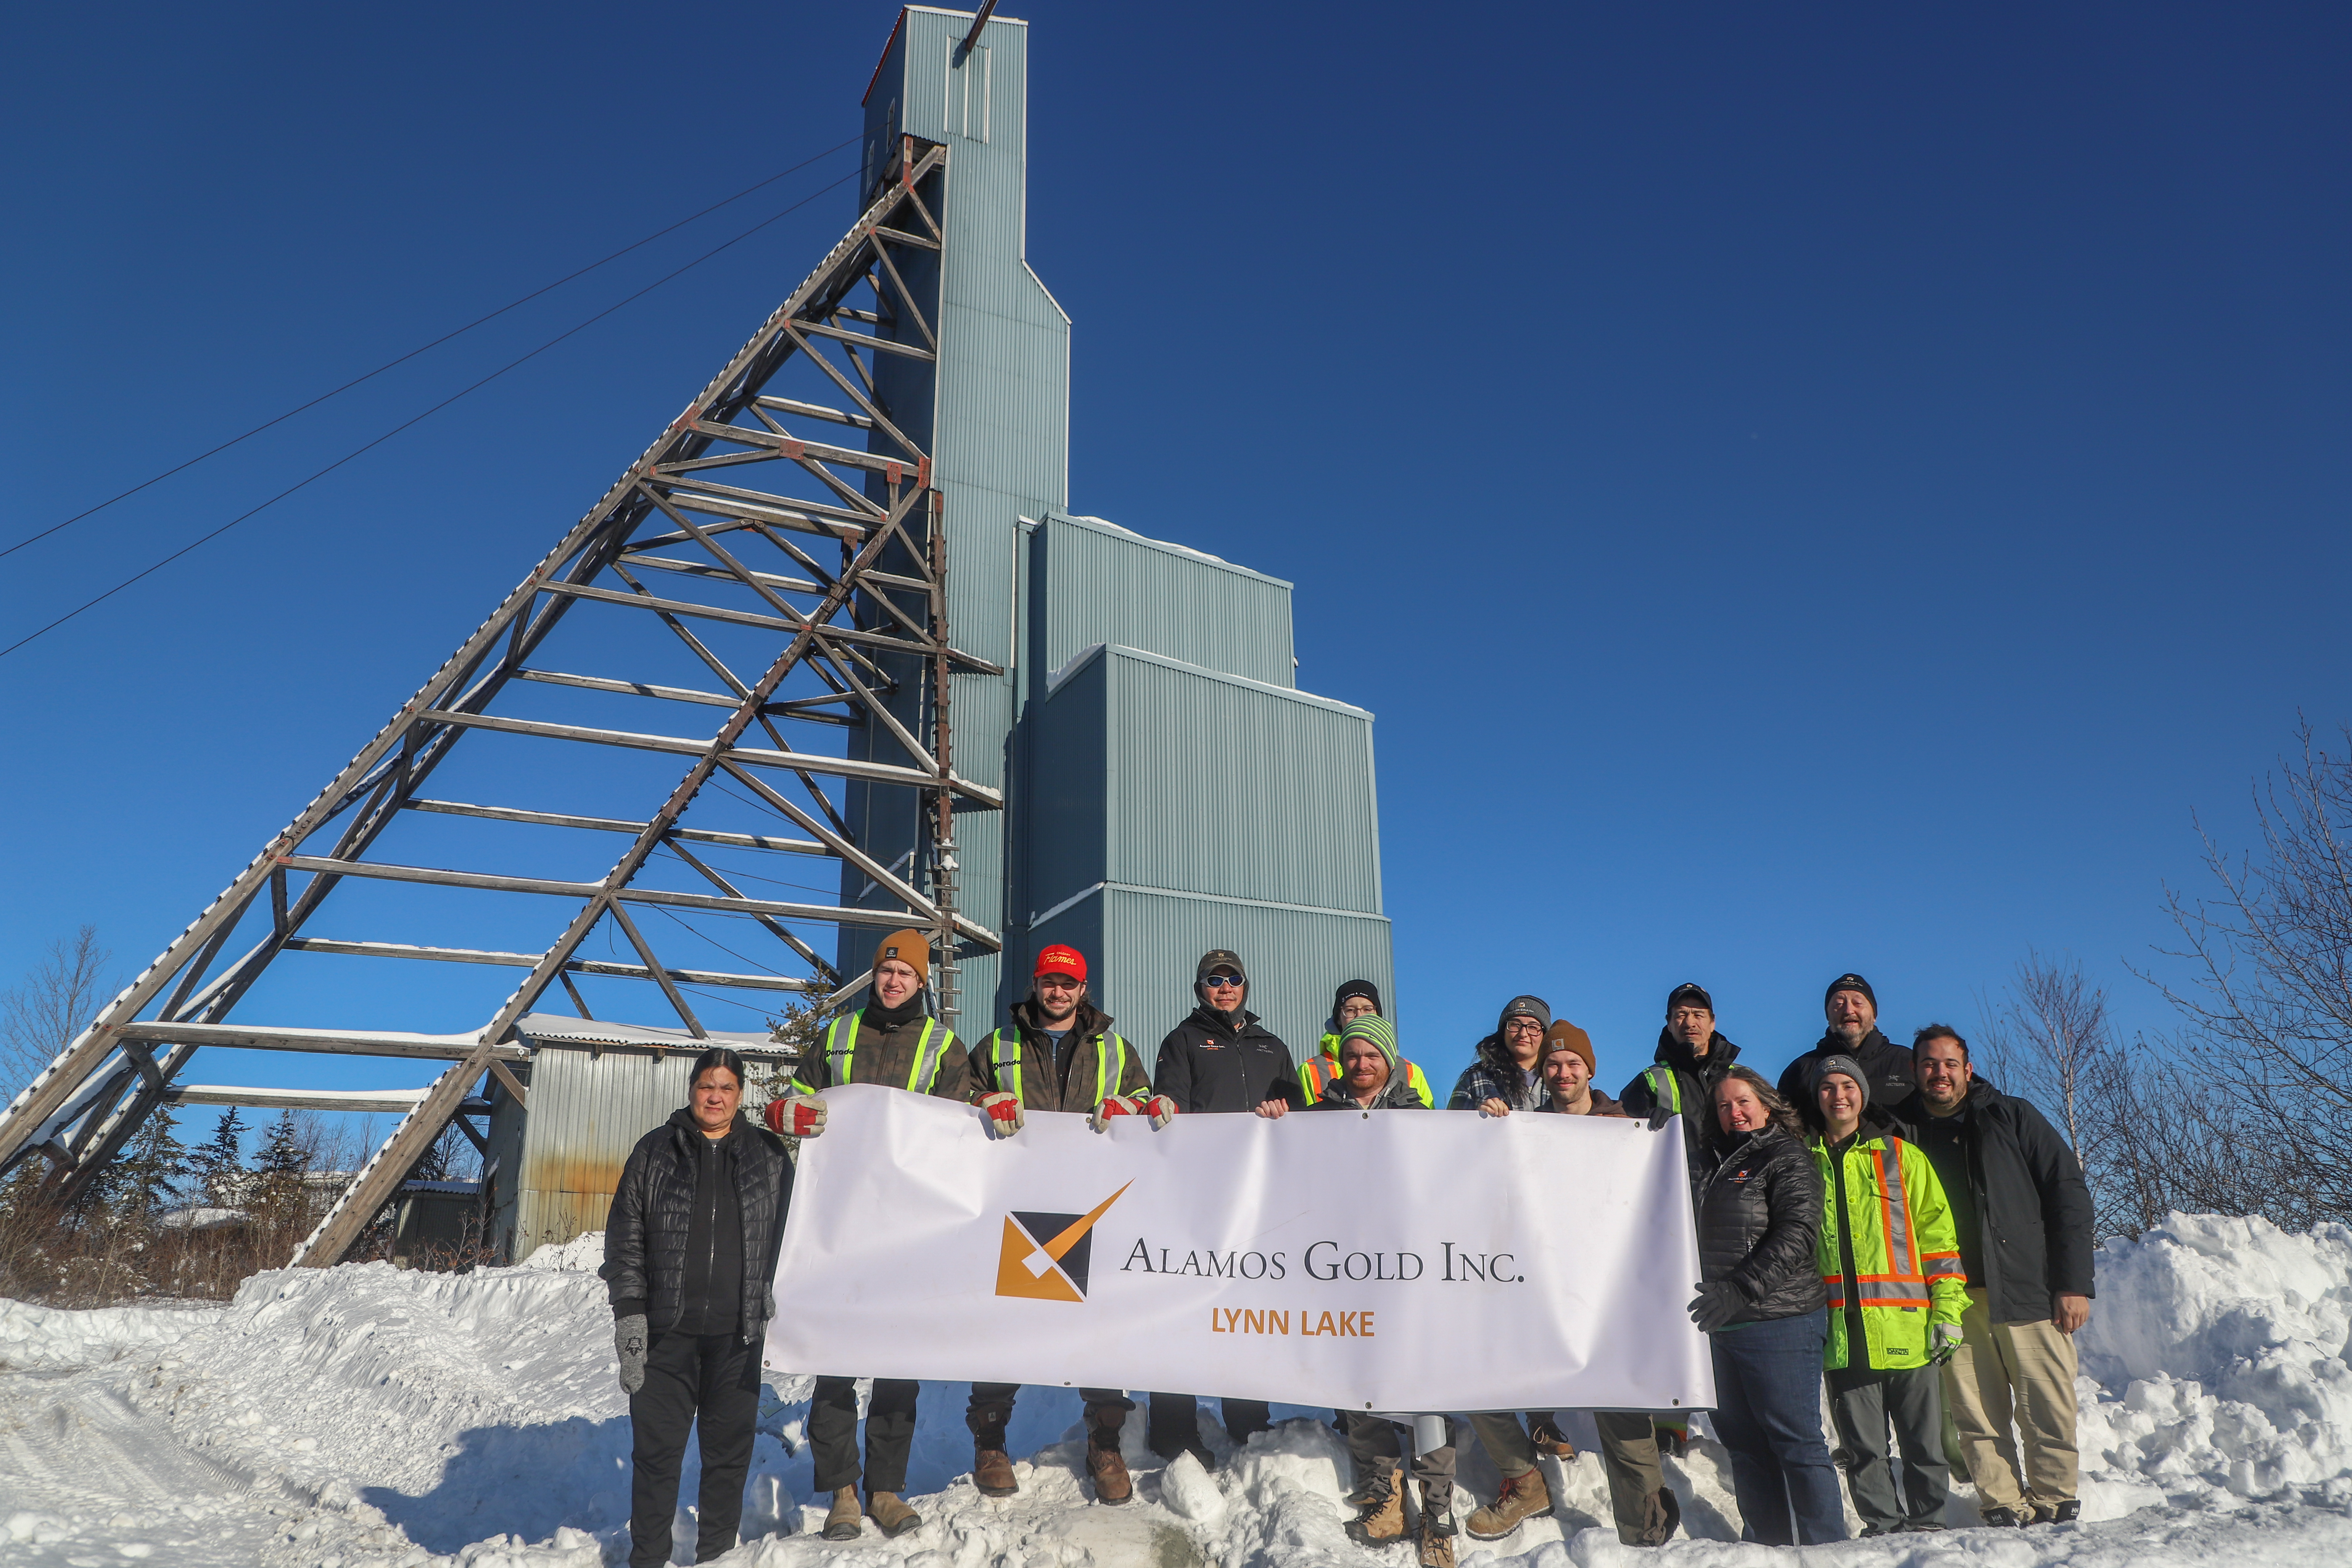 Group of people standing next to each other in the snow in front of a building and holding an Alamos Gold Lynn Lake banner.